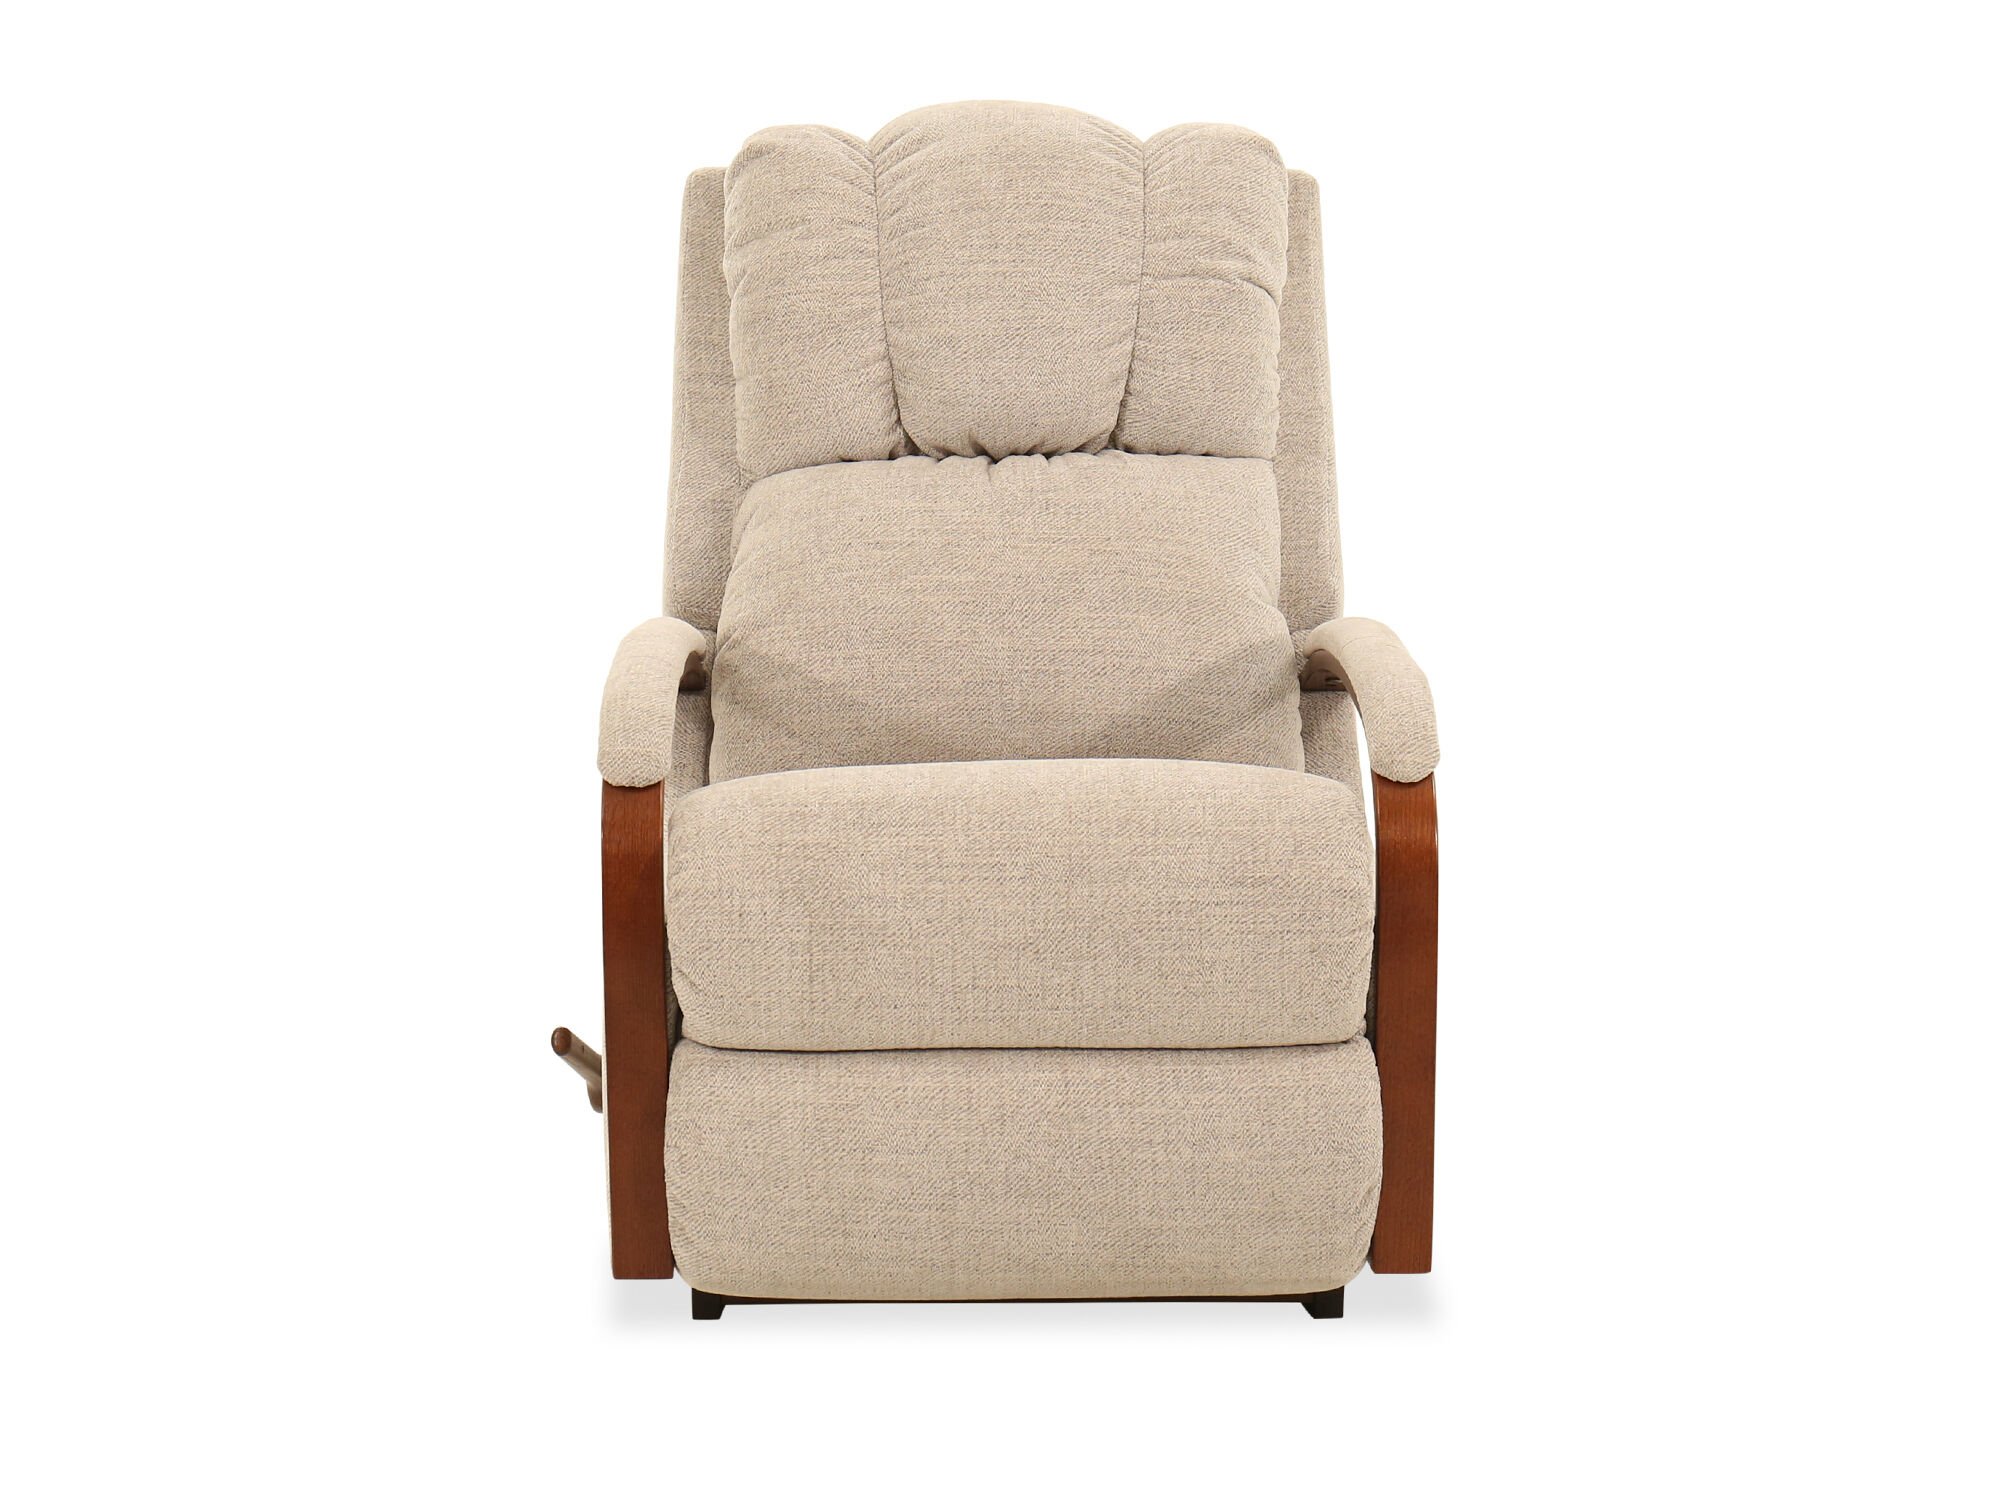 mathis brothers lazy boy recliners